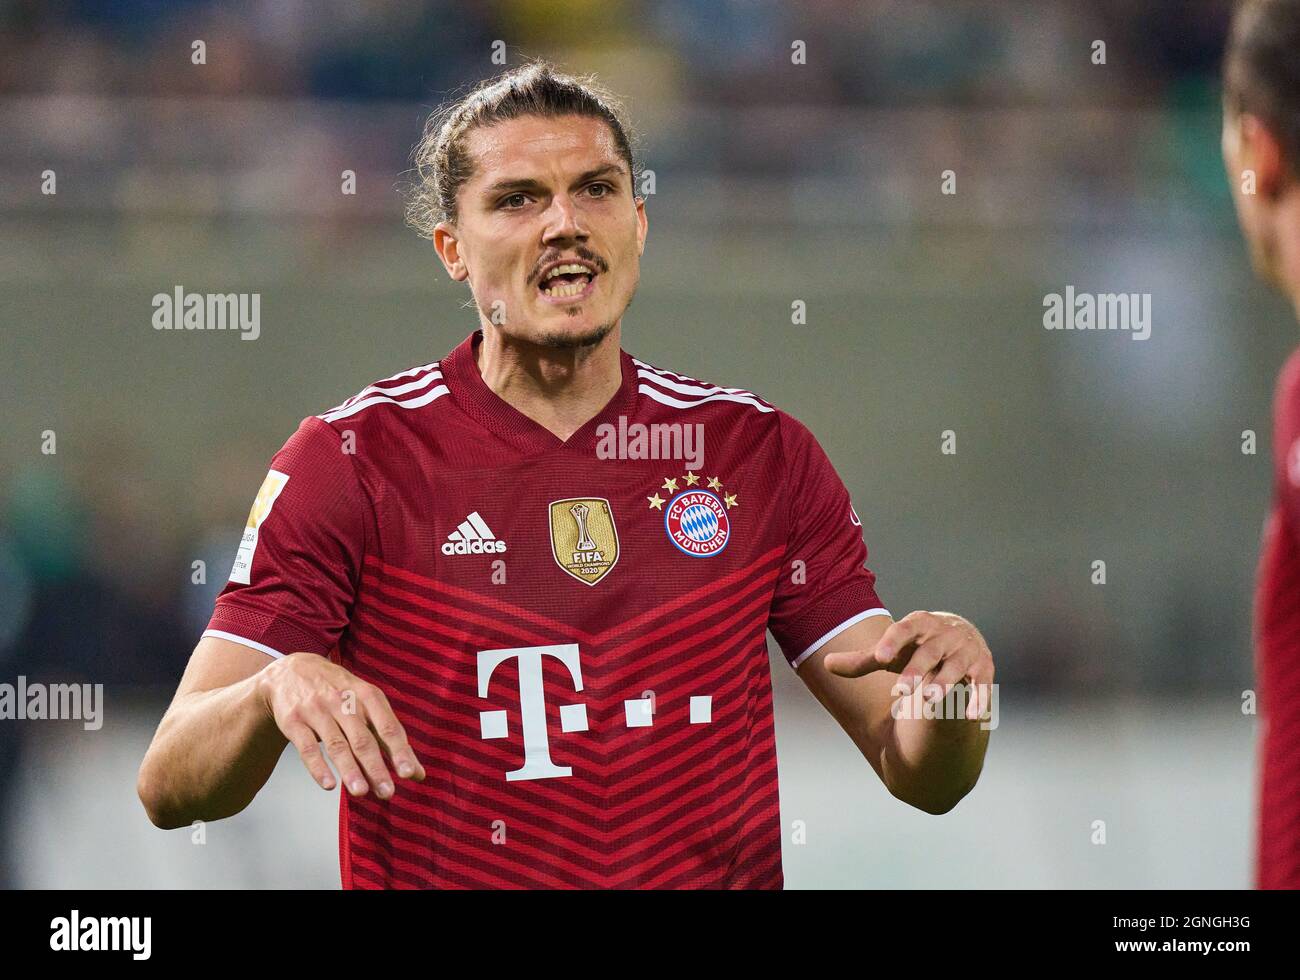 Marcel Sabitzer, FCB 18  in the match SpVgg GREUTHER FÜRTH - FC BAYERN MUENCHEN 1-3 1.German Football League on September 24, 2021 in Fuerth, Germany. Season 2021/2022, matchday 7, 1.Bundesliga, FCB, München, 7.Spieltag. © Peter Schatz / Alamy Live News    - DFL REGULATIONS PROHIBIT ANY USE OF PHOTOGRAPHS as IMAGE SEQUENCES and/or QUASI-VIDEO - Stock Photo